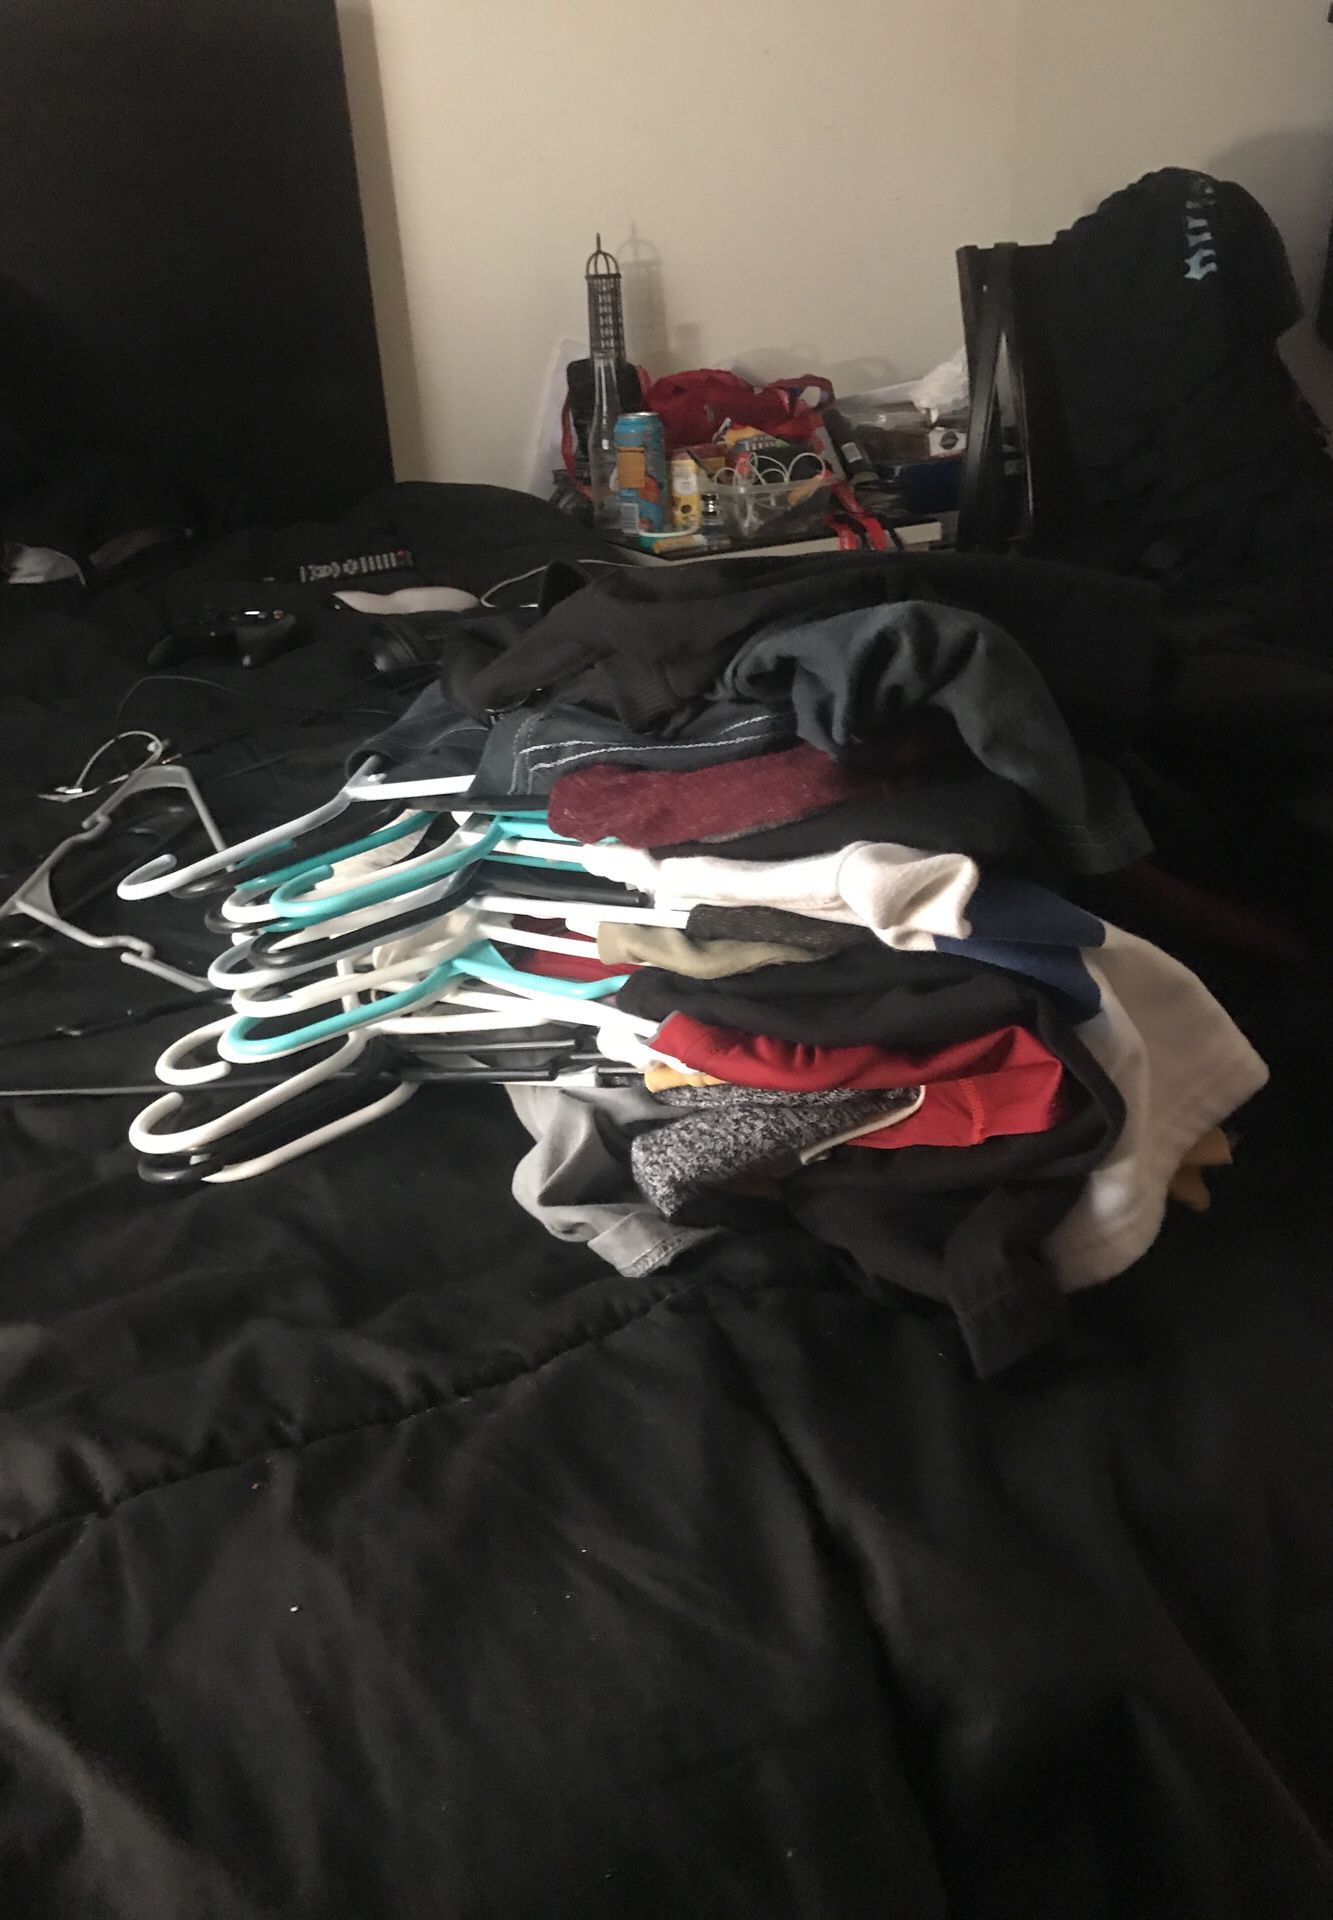 CLOTHES HAUL SELLING 21 LARGE SHIRTS FOR MEN